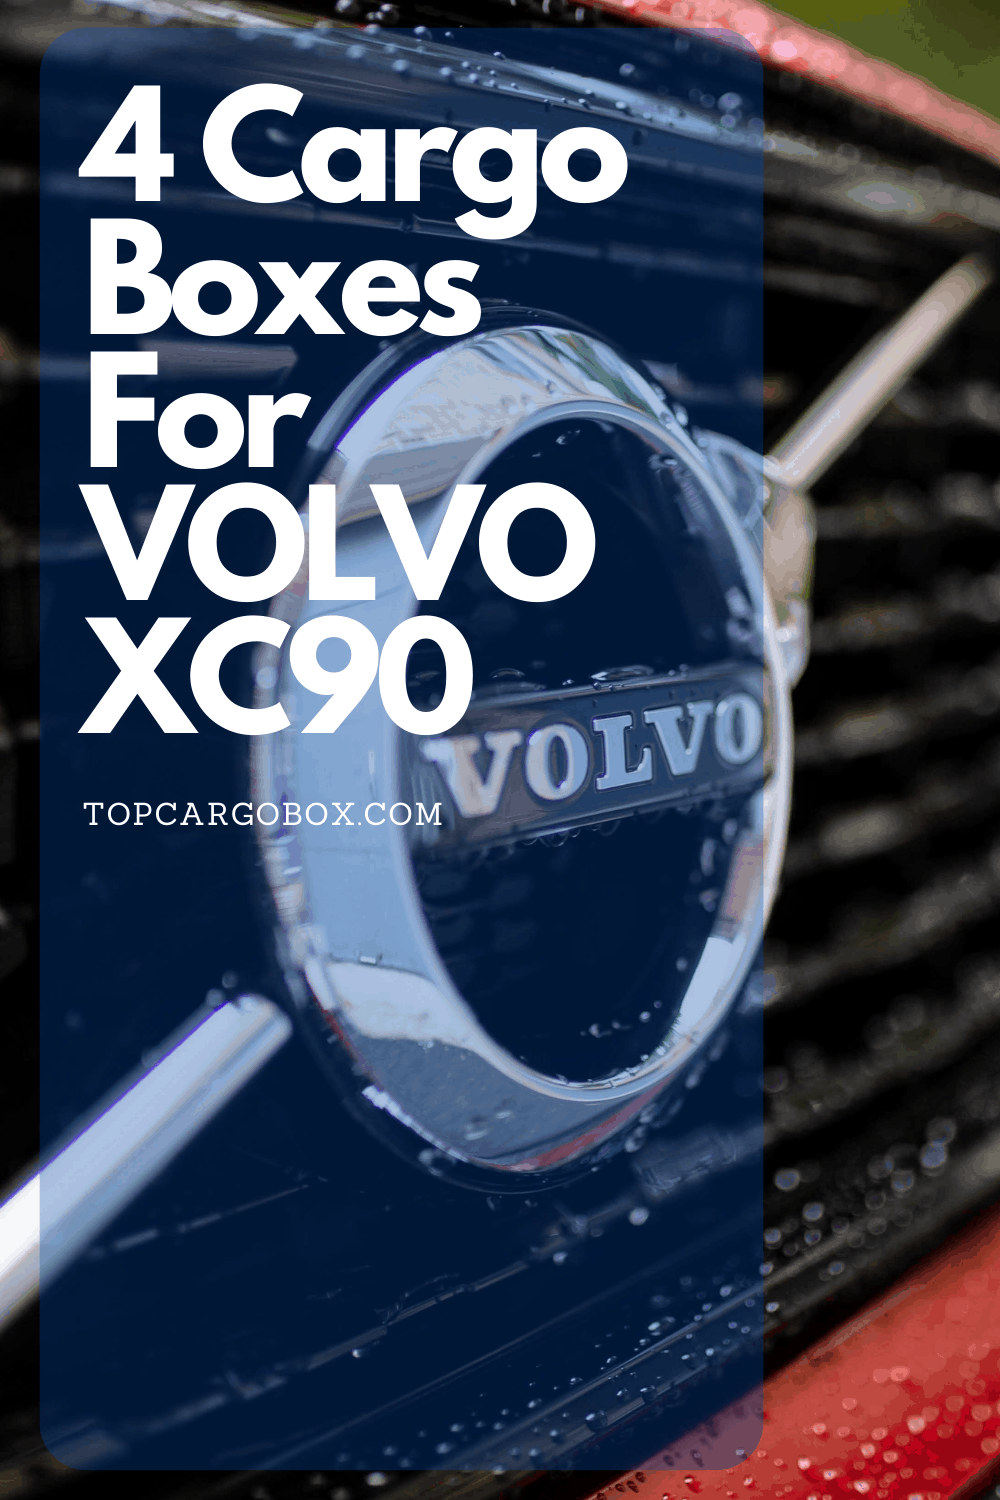 In this article, you will find 4 cargo boxs for Volvo XC90 in mintues without spending tons of time and much energy in searching results online or in books.